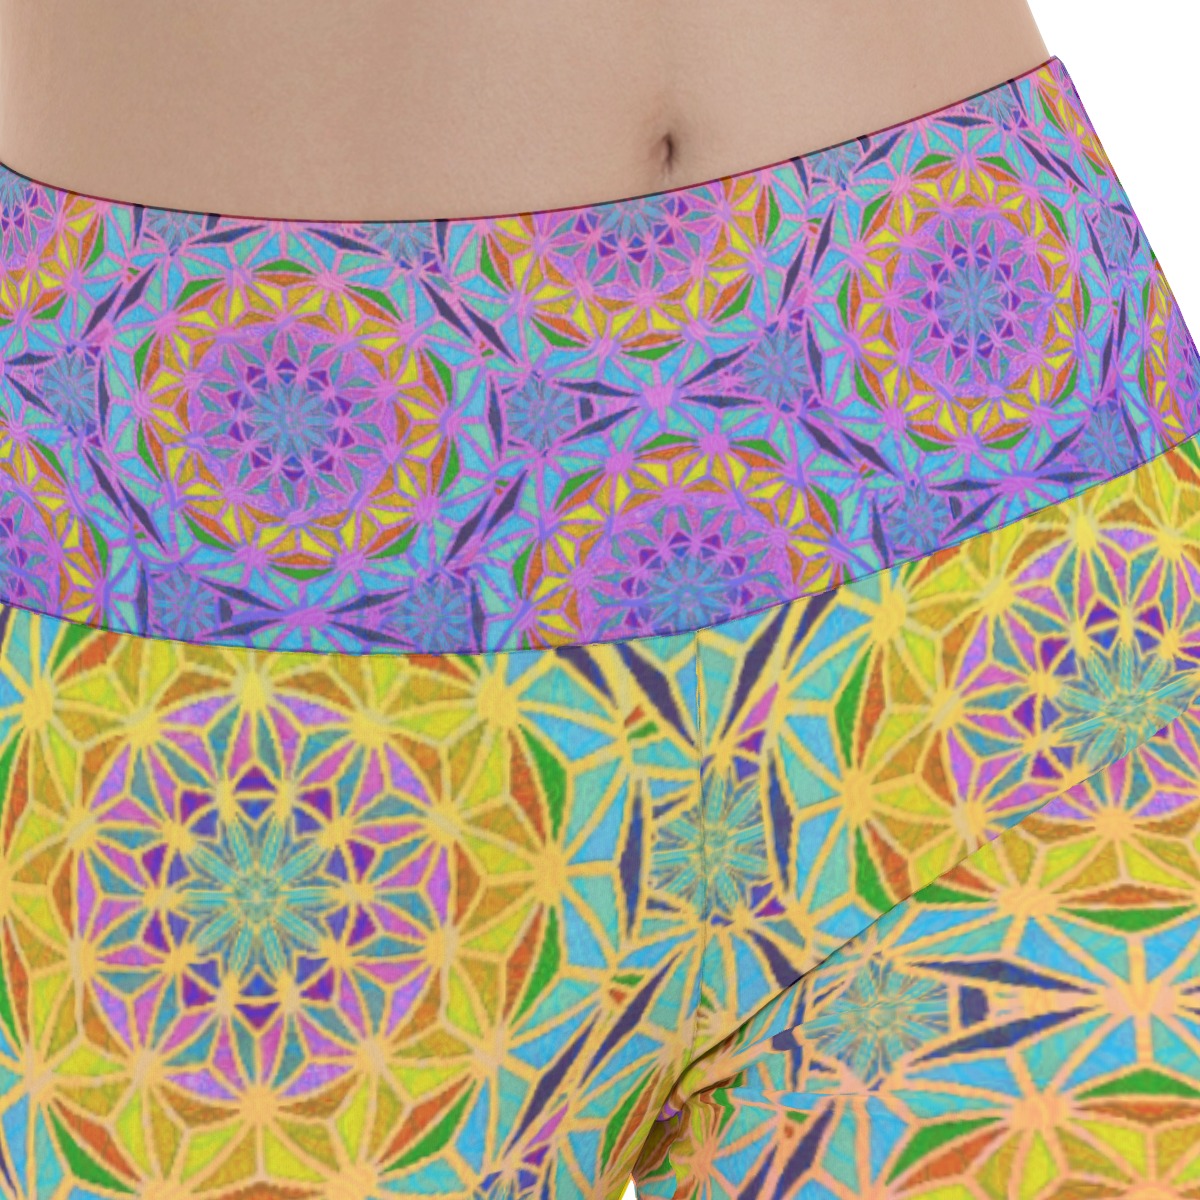 Birth of a Sunflower Flare Yoga Pants